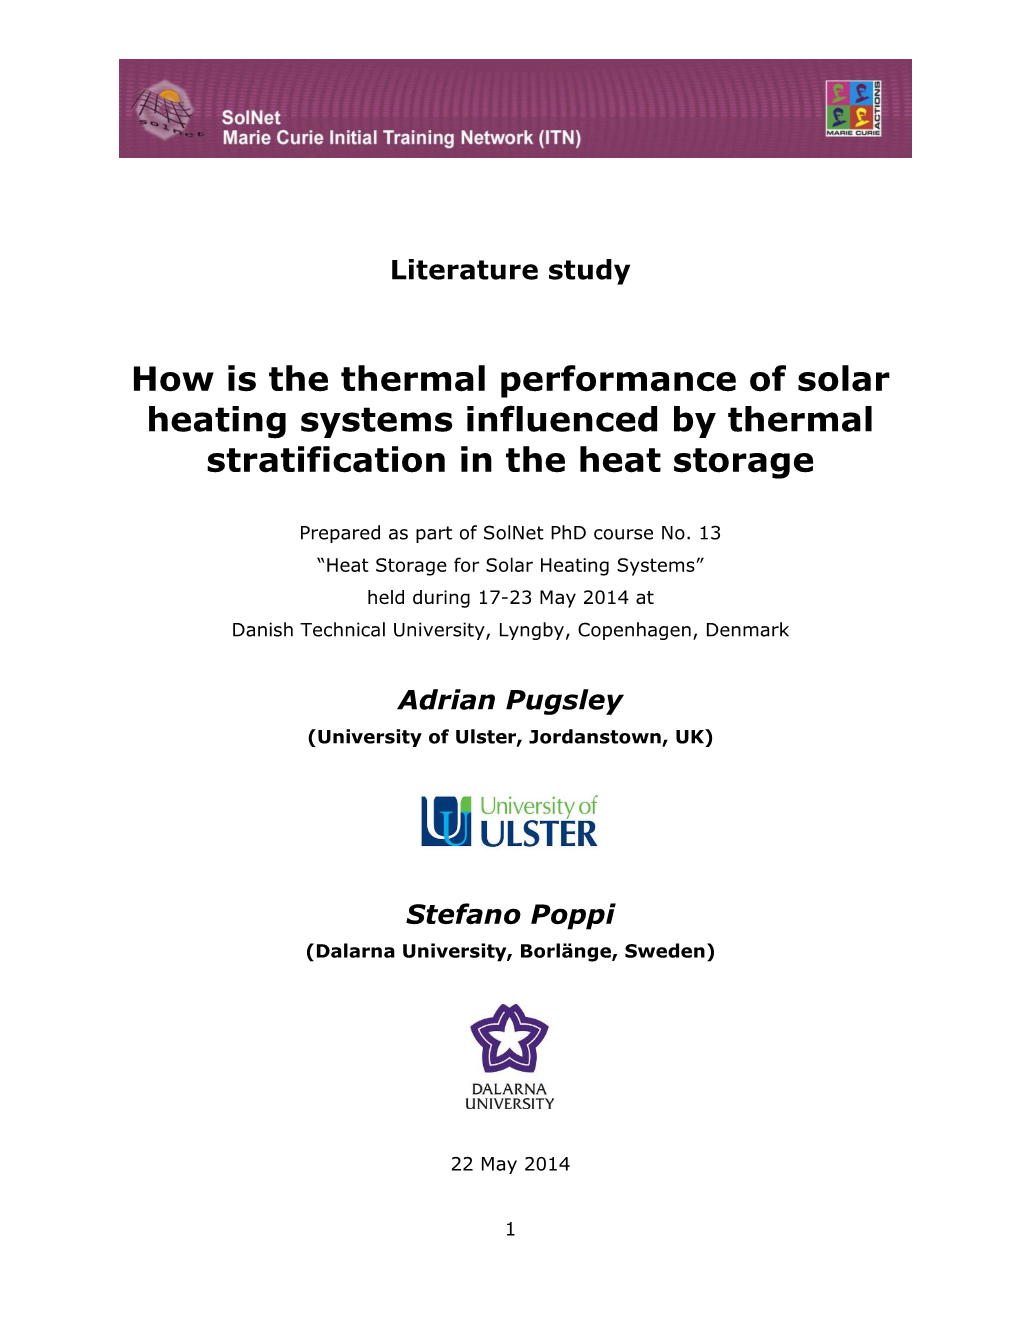 How Is the Thermal Performance of Solar Heating Systems Influenced by Thermal Stratification in the Heat Storage